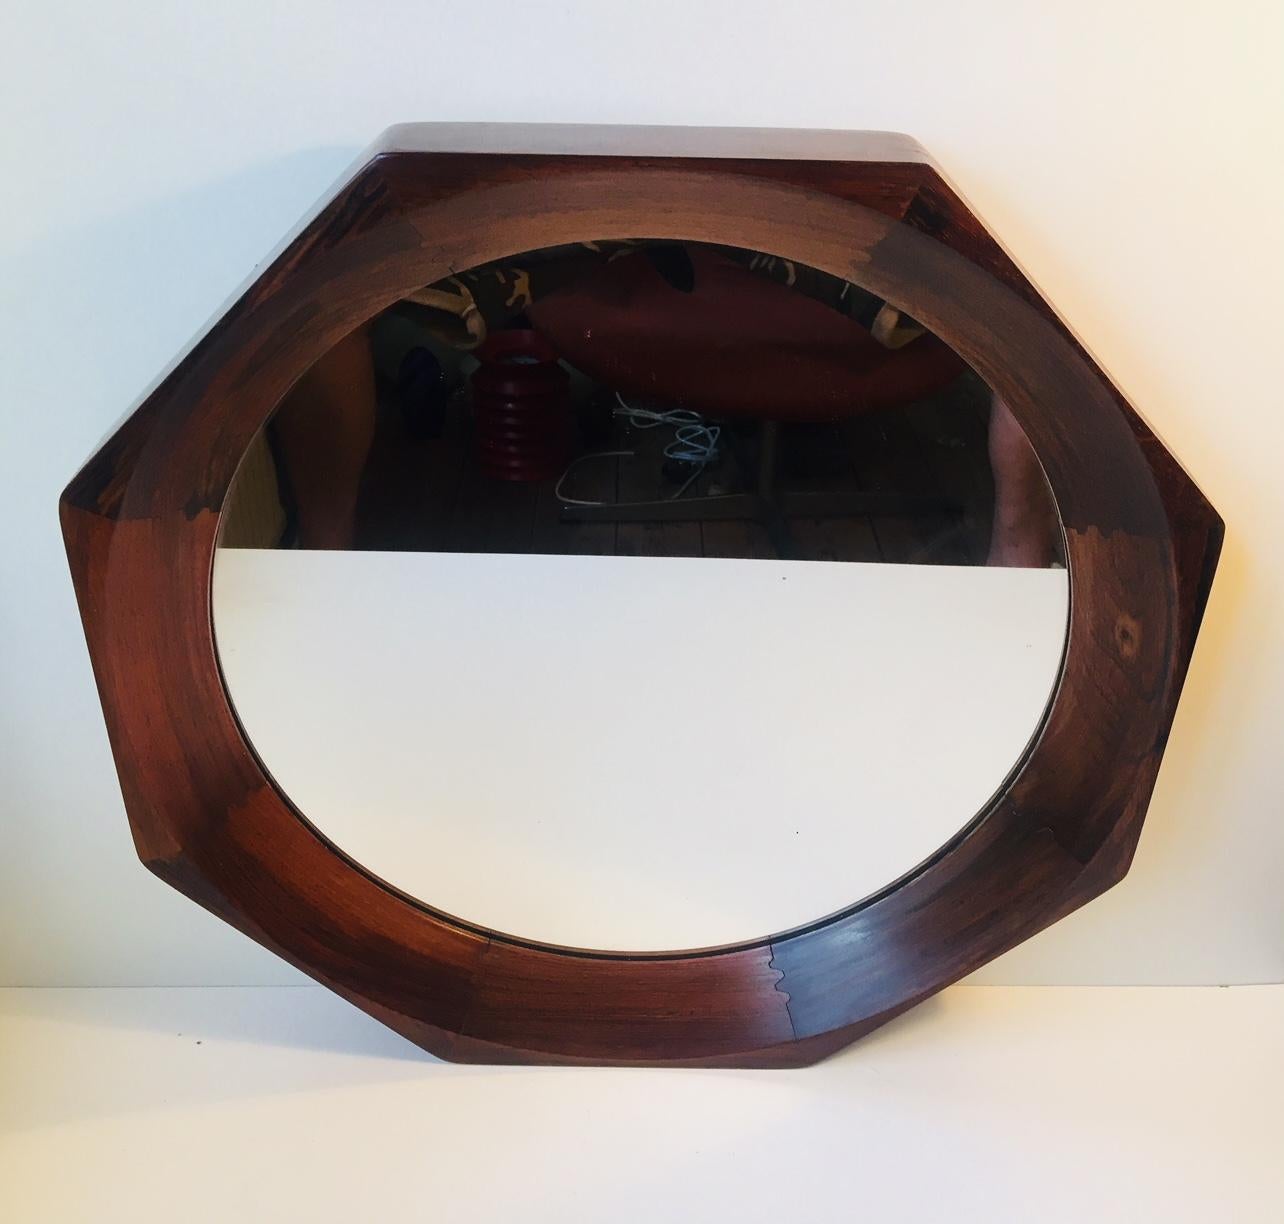 This wall hung mirror was manufactured and designed by BVK in Denmark during the 1960s. BVK is best known for making small furniture for Illums Bolighus in Copenhagen. It features a solid and concave teak frame, round mirrored glass, secure wall